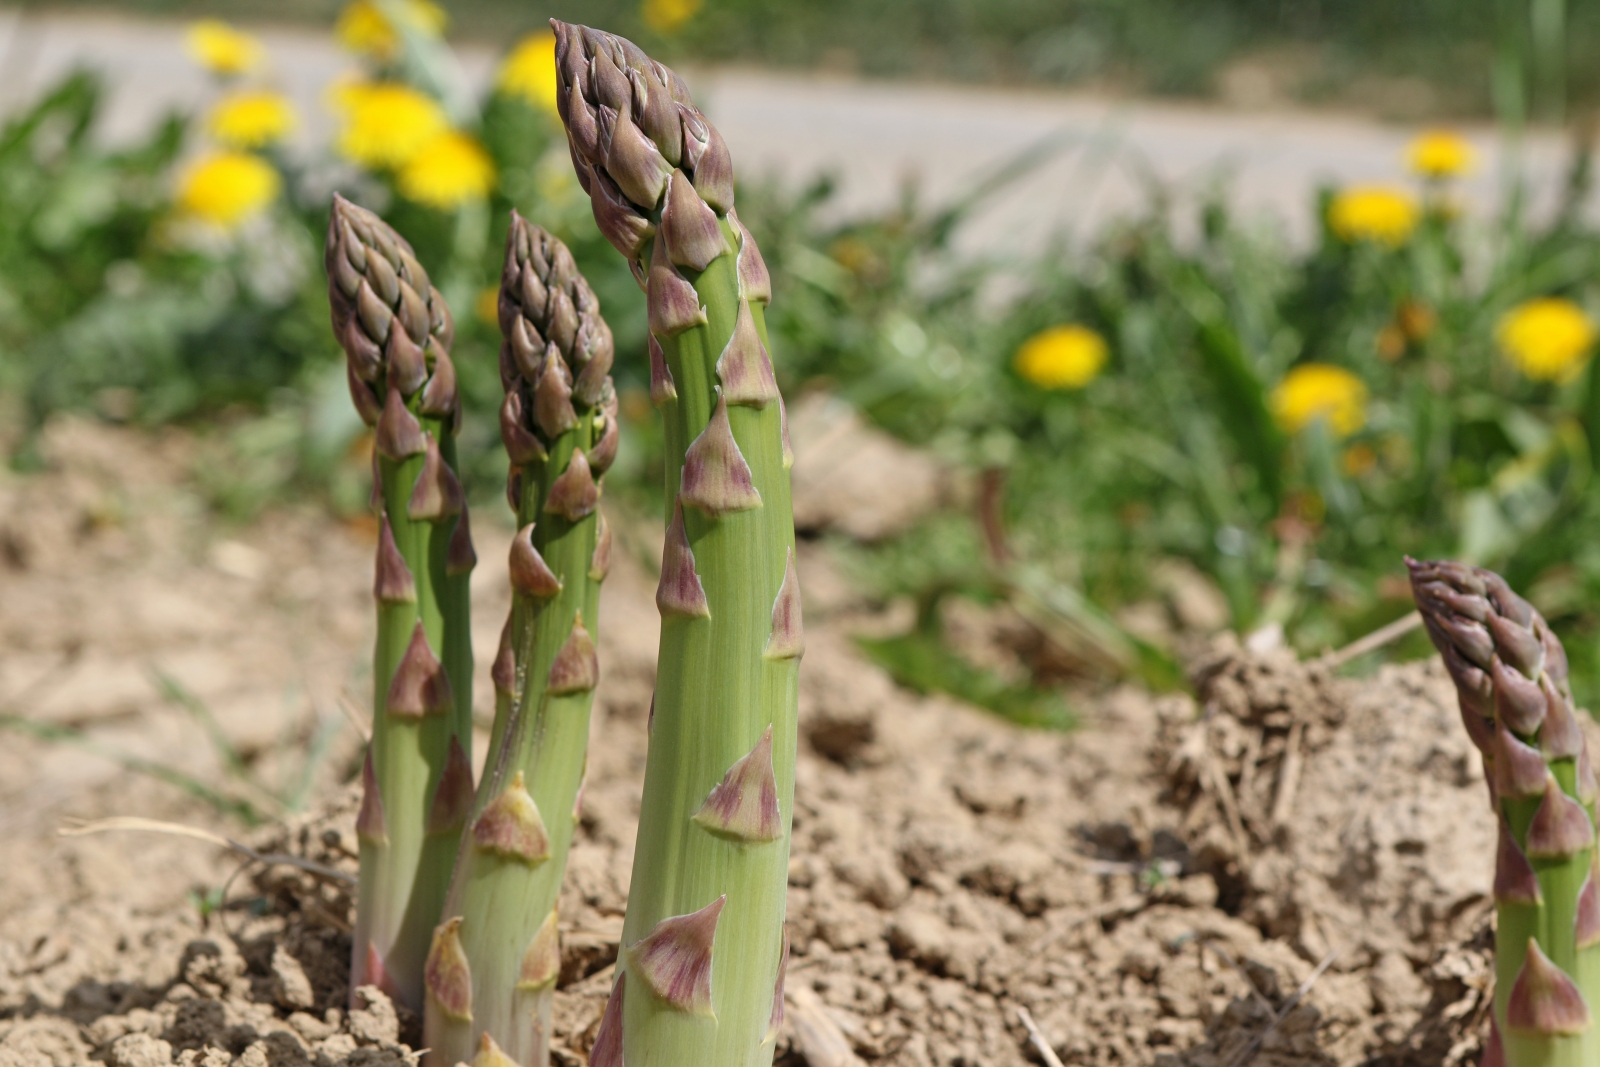 Asparagus. Photo by Chris6/Getty Images